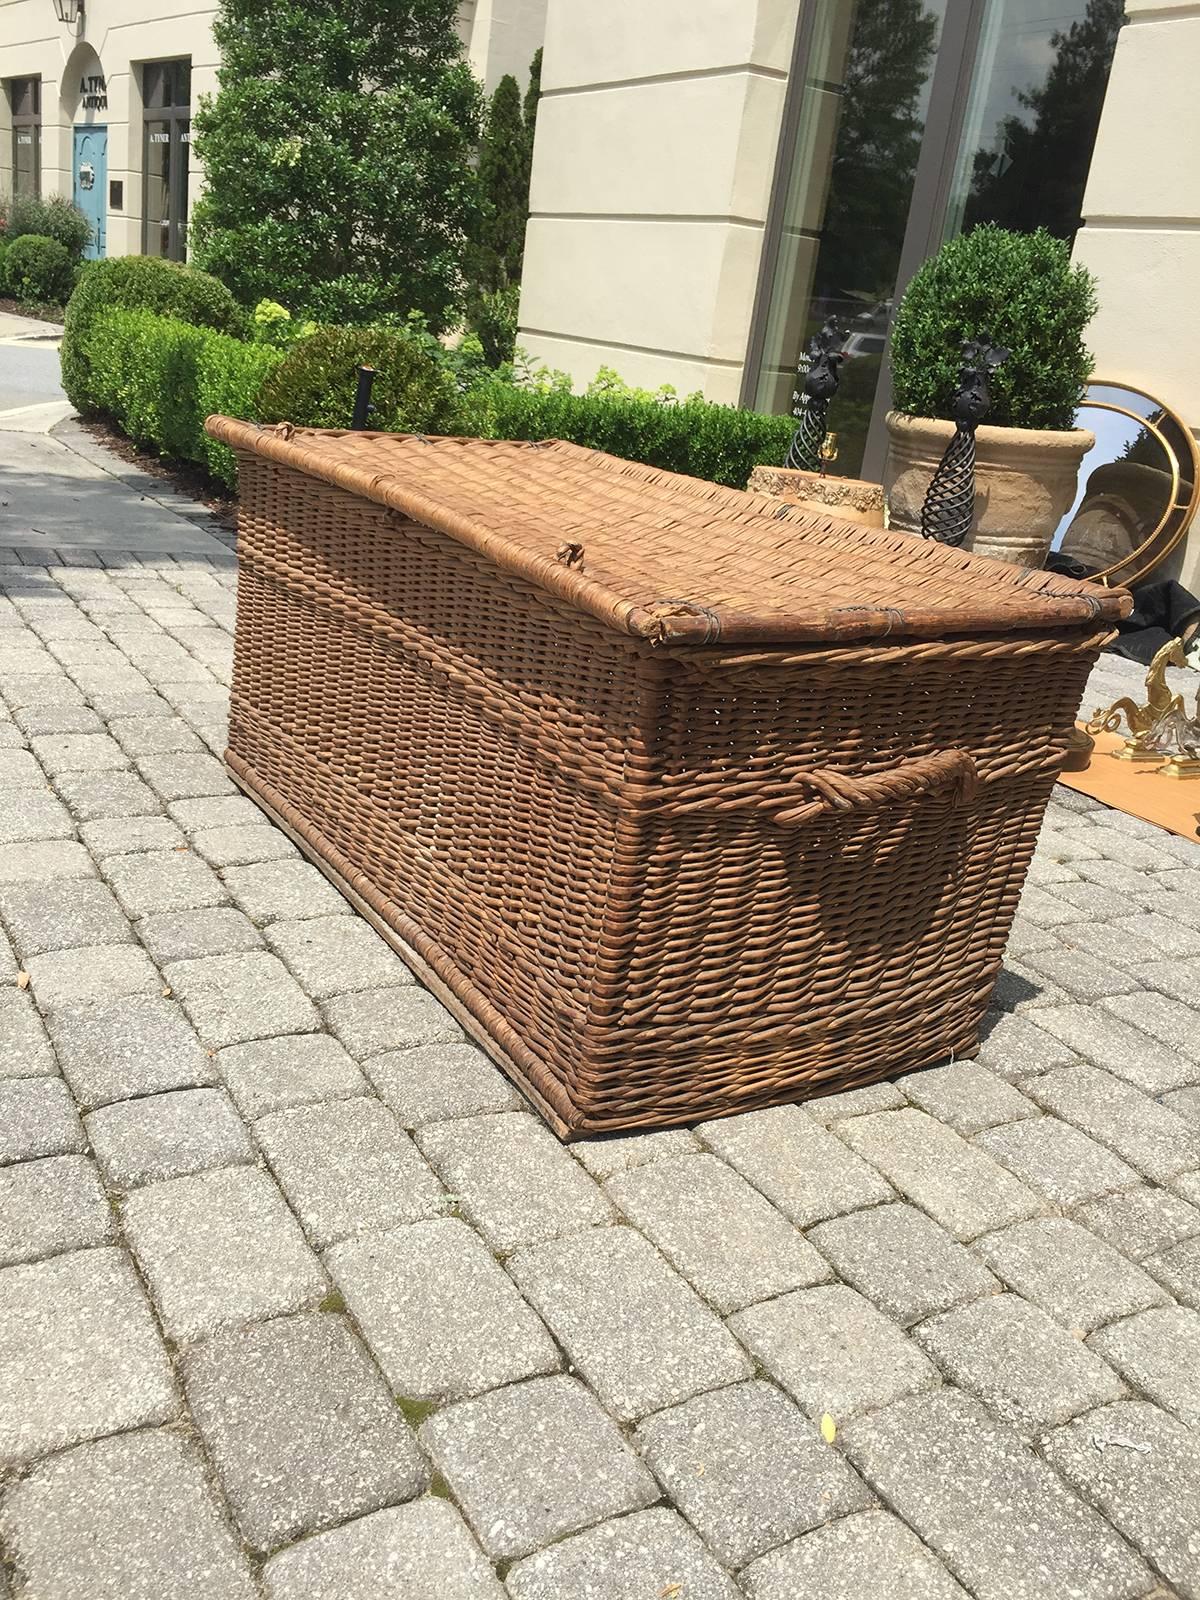 Early 20th century large wicker trunk.